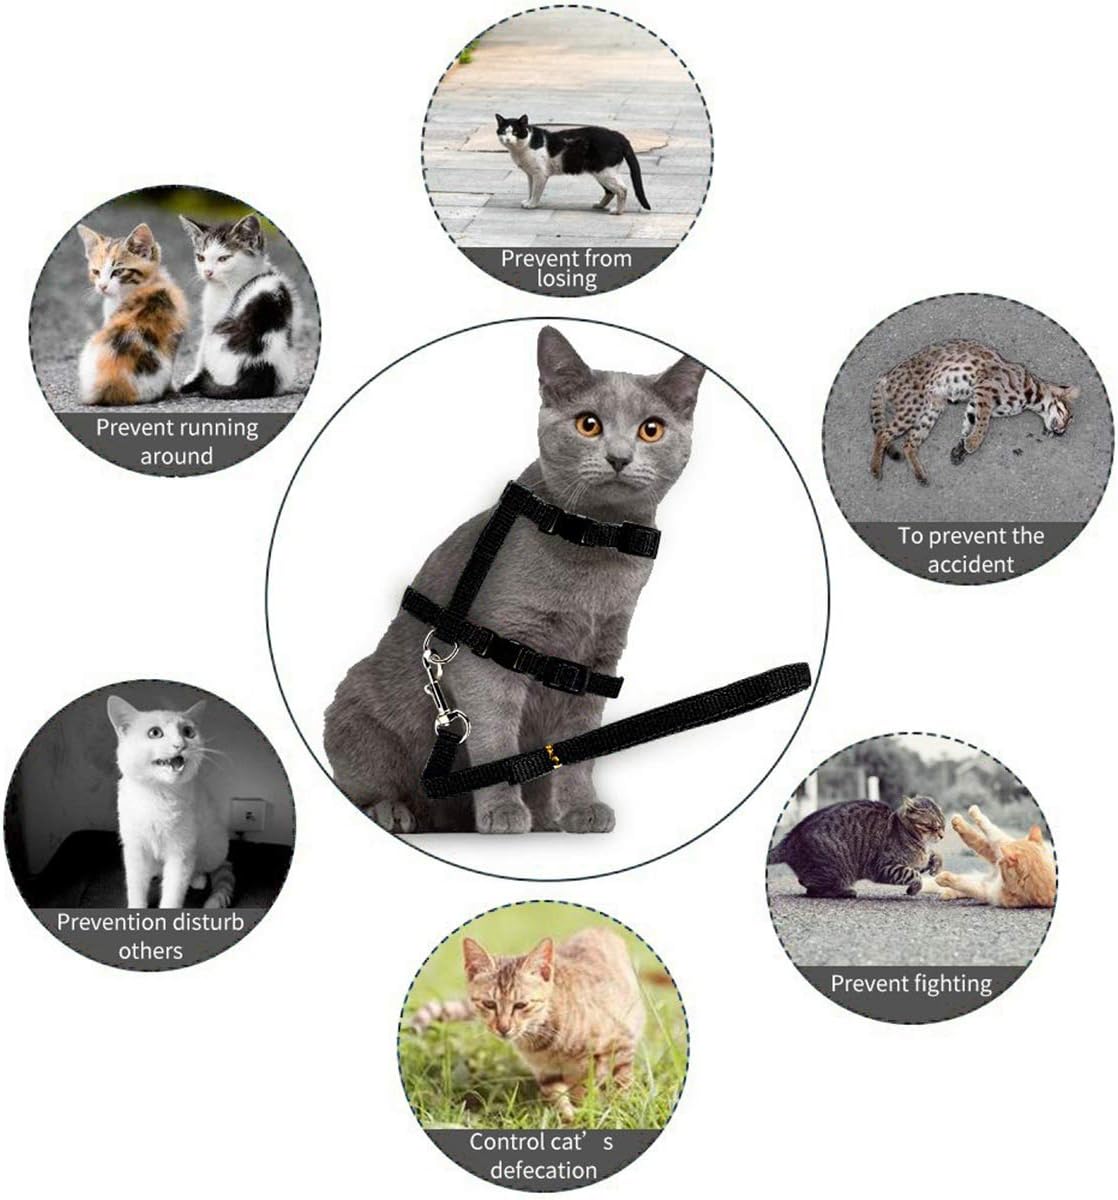 Everlab Cat Harness Collar and Leash For Pet Cat Outdoor Walking